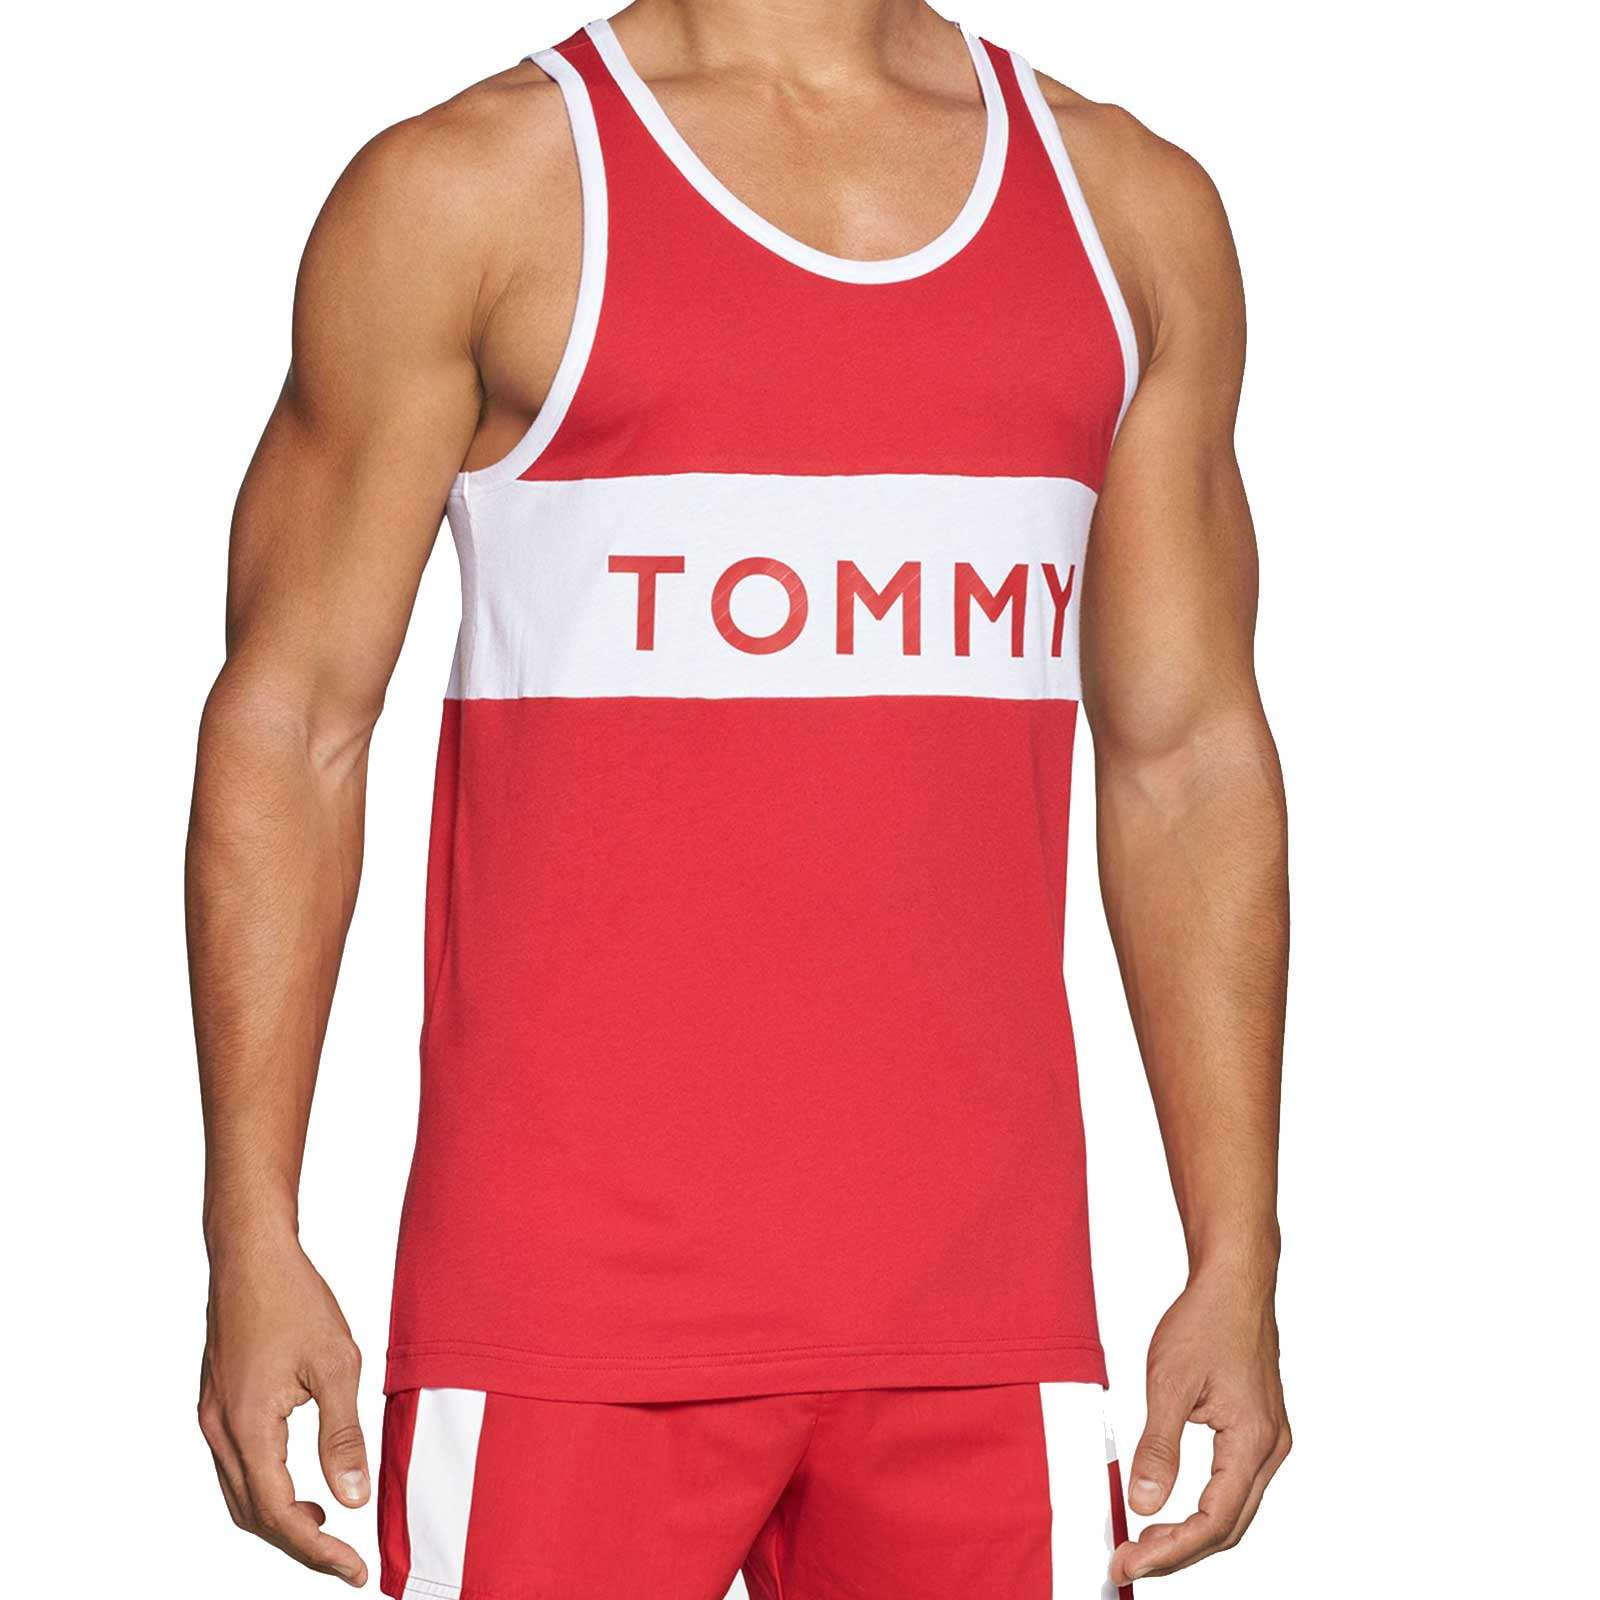 Buy > tommy hilfiger tank top mens > in stock